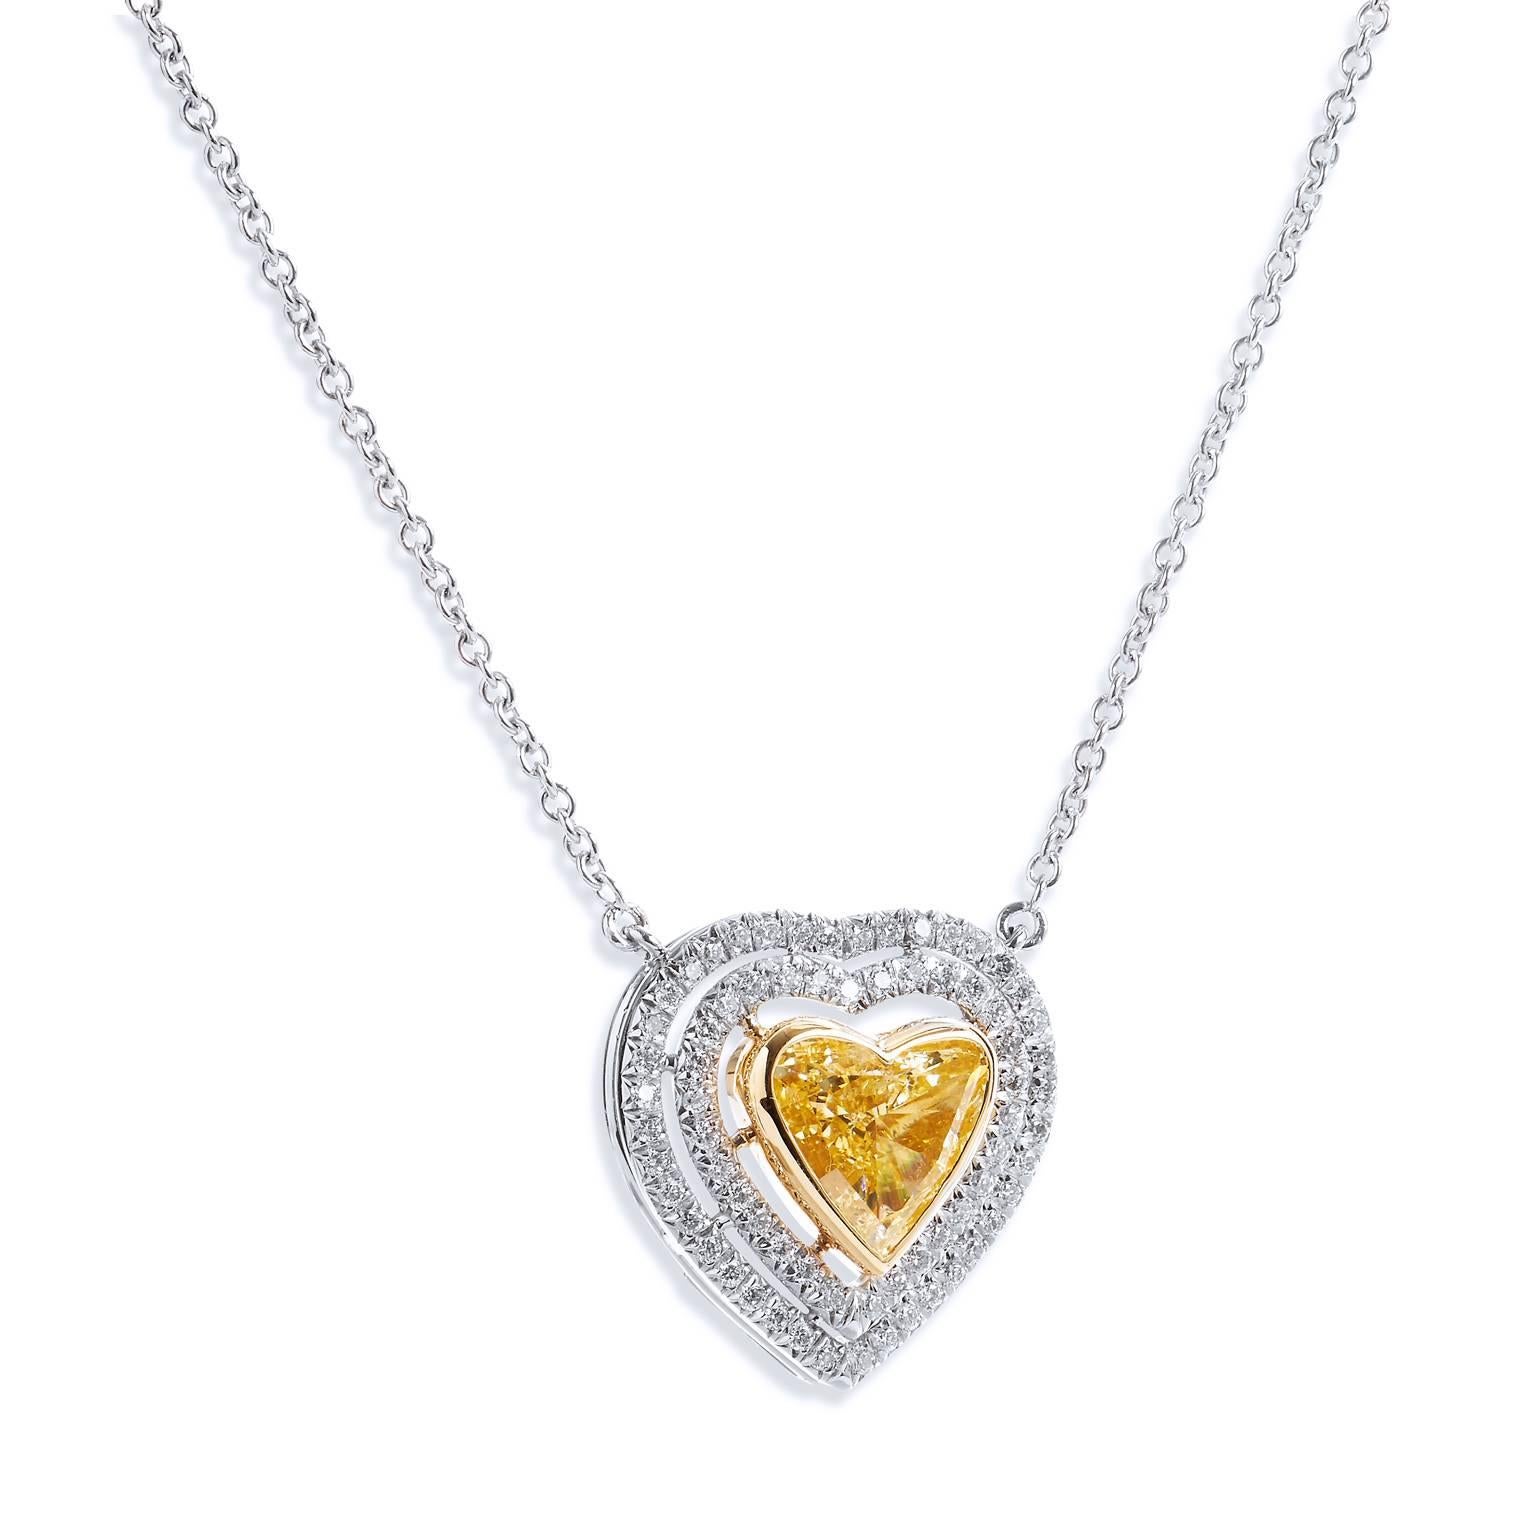 1.79 carat Natural Fancy Yellow Heart Shaped Diamond 18 karat White Gold Pendant

Handmade in 18kt white gold, this stunning pendant features an impressive 1.79ct SI2 natural fancy yellow heart shape diamond embraced by two layers of diamonds